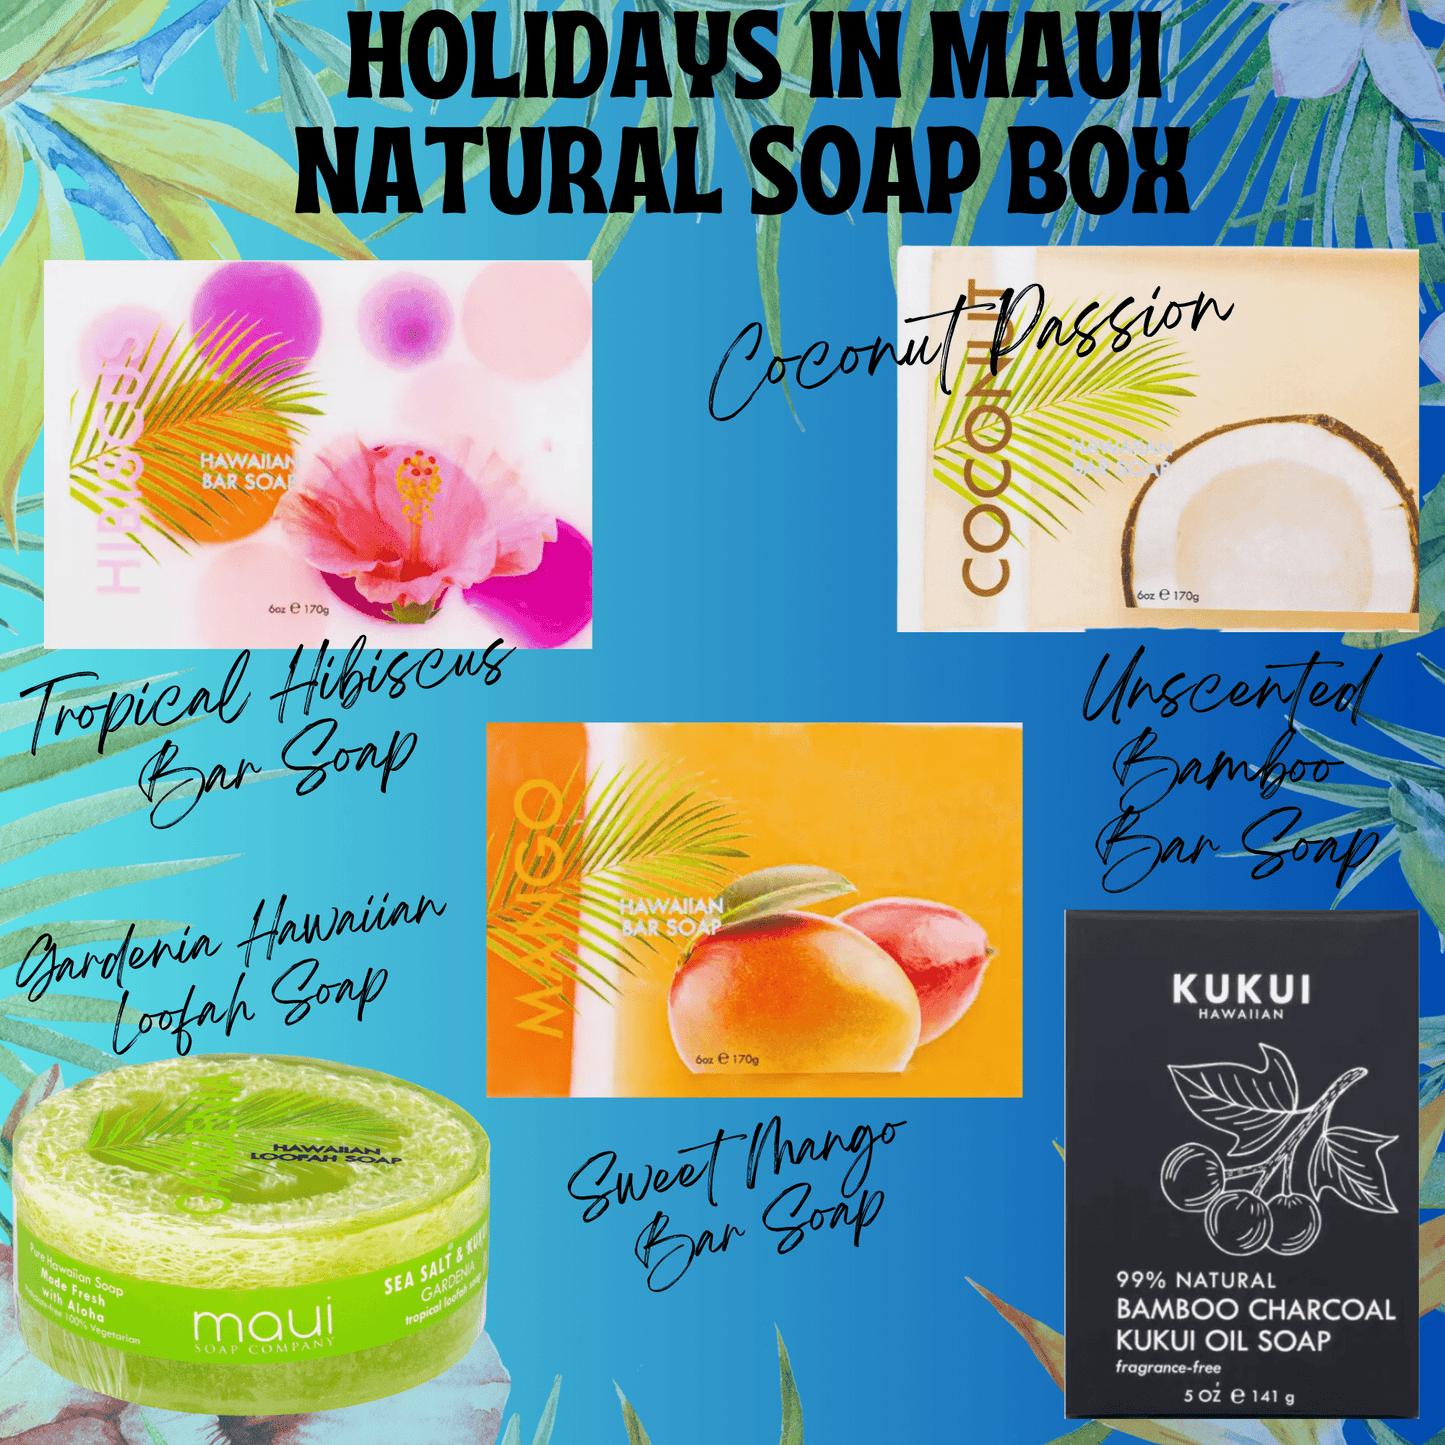 Limited Edition: Holidays in Maui VIP Reservation for Alicia P